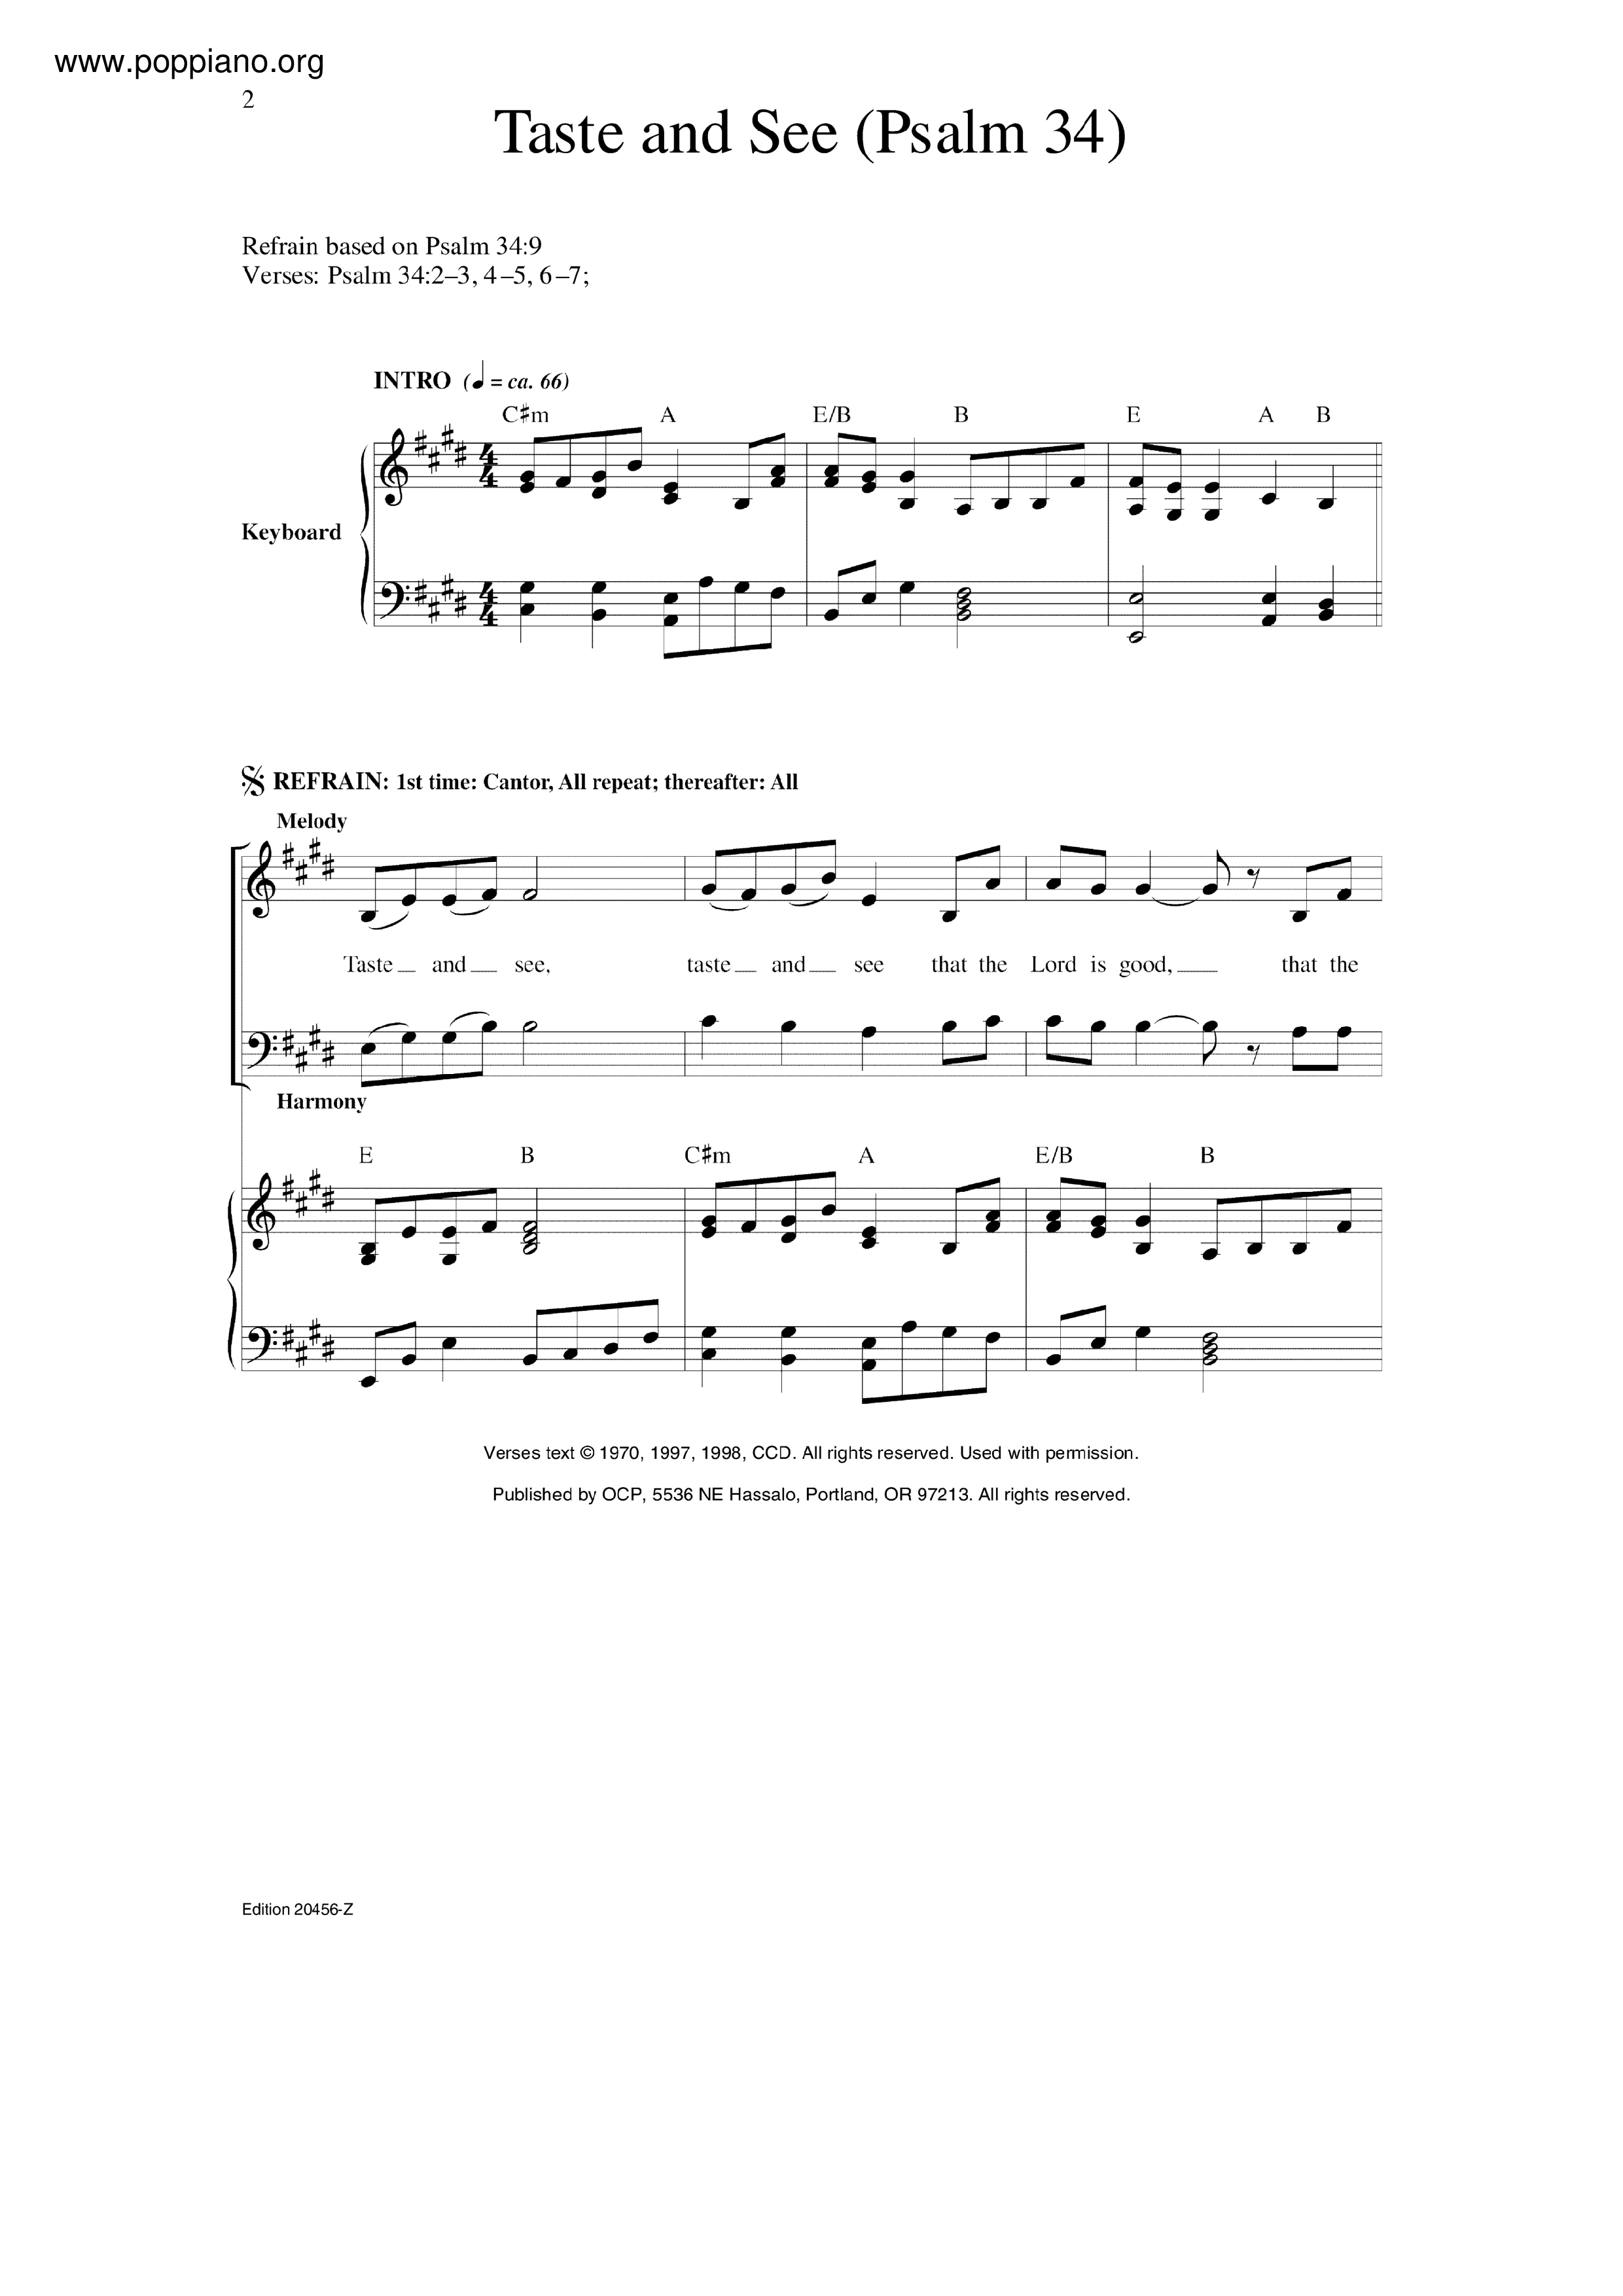 Taste And See (Psalm 34) Score